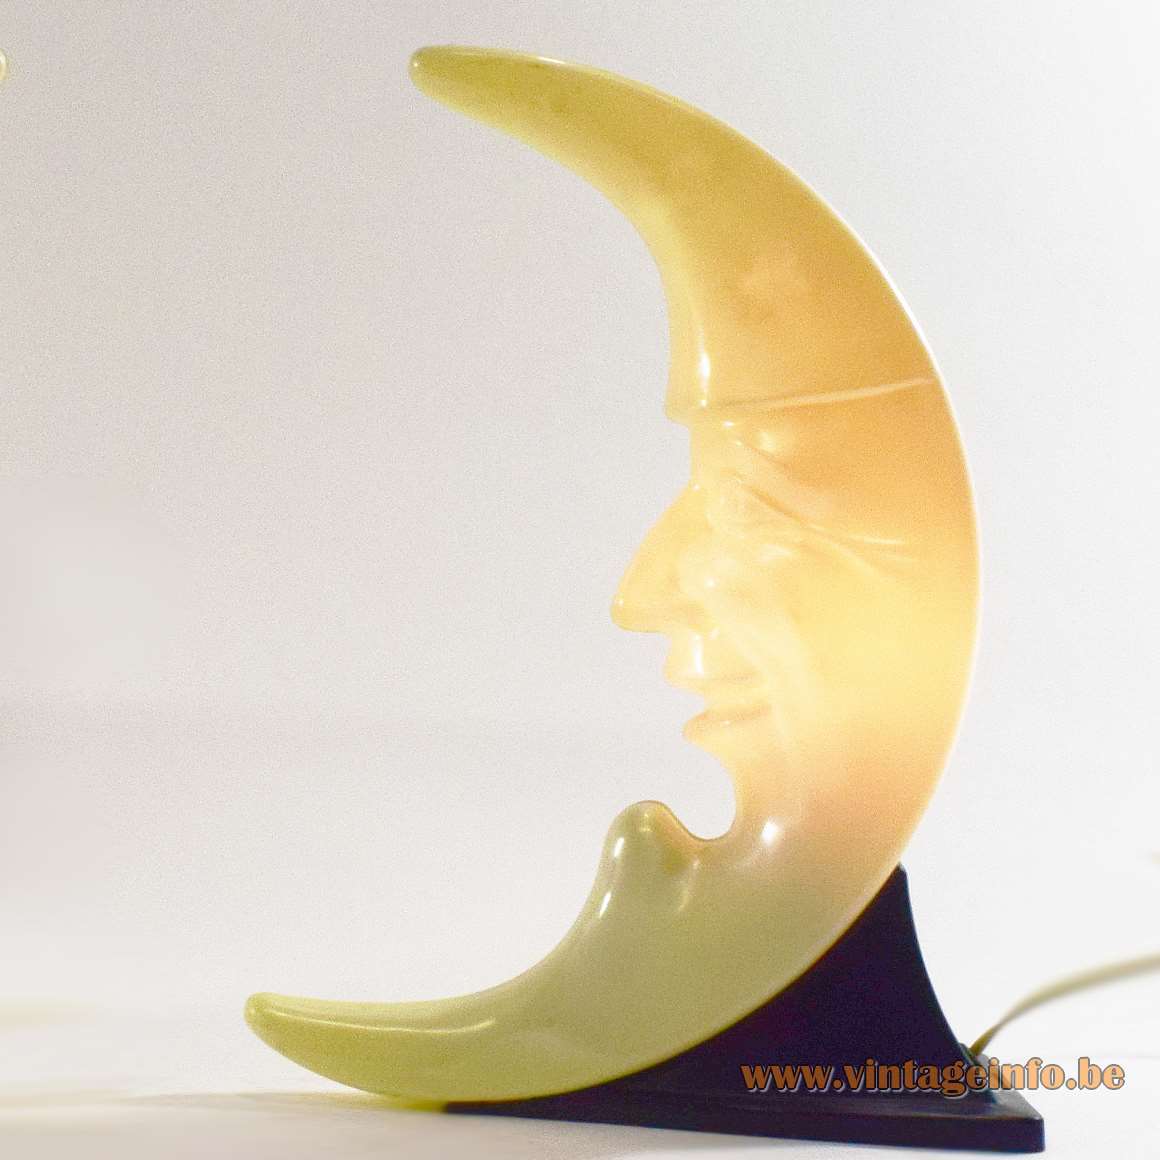 Man In The Moon Table Lamps - Valvic Electrical Products Ltd, London 